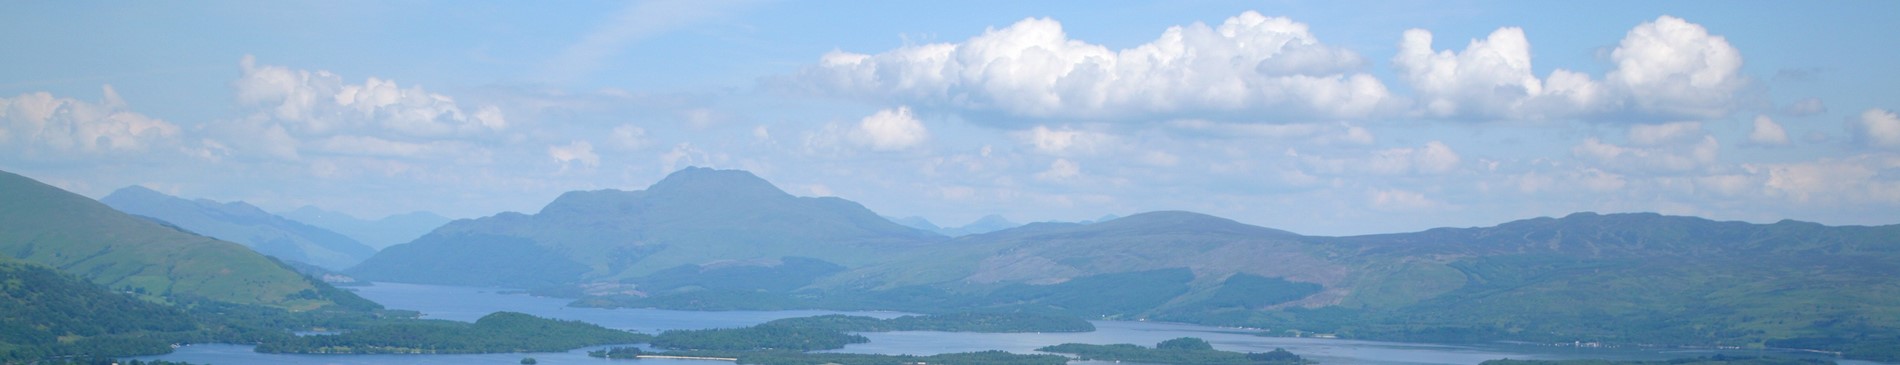 Views of Loch Lomond and the hills in the back ground